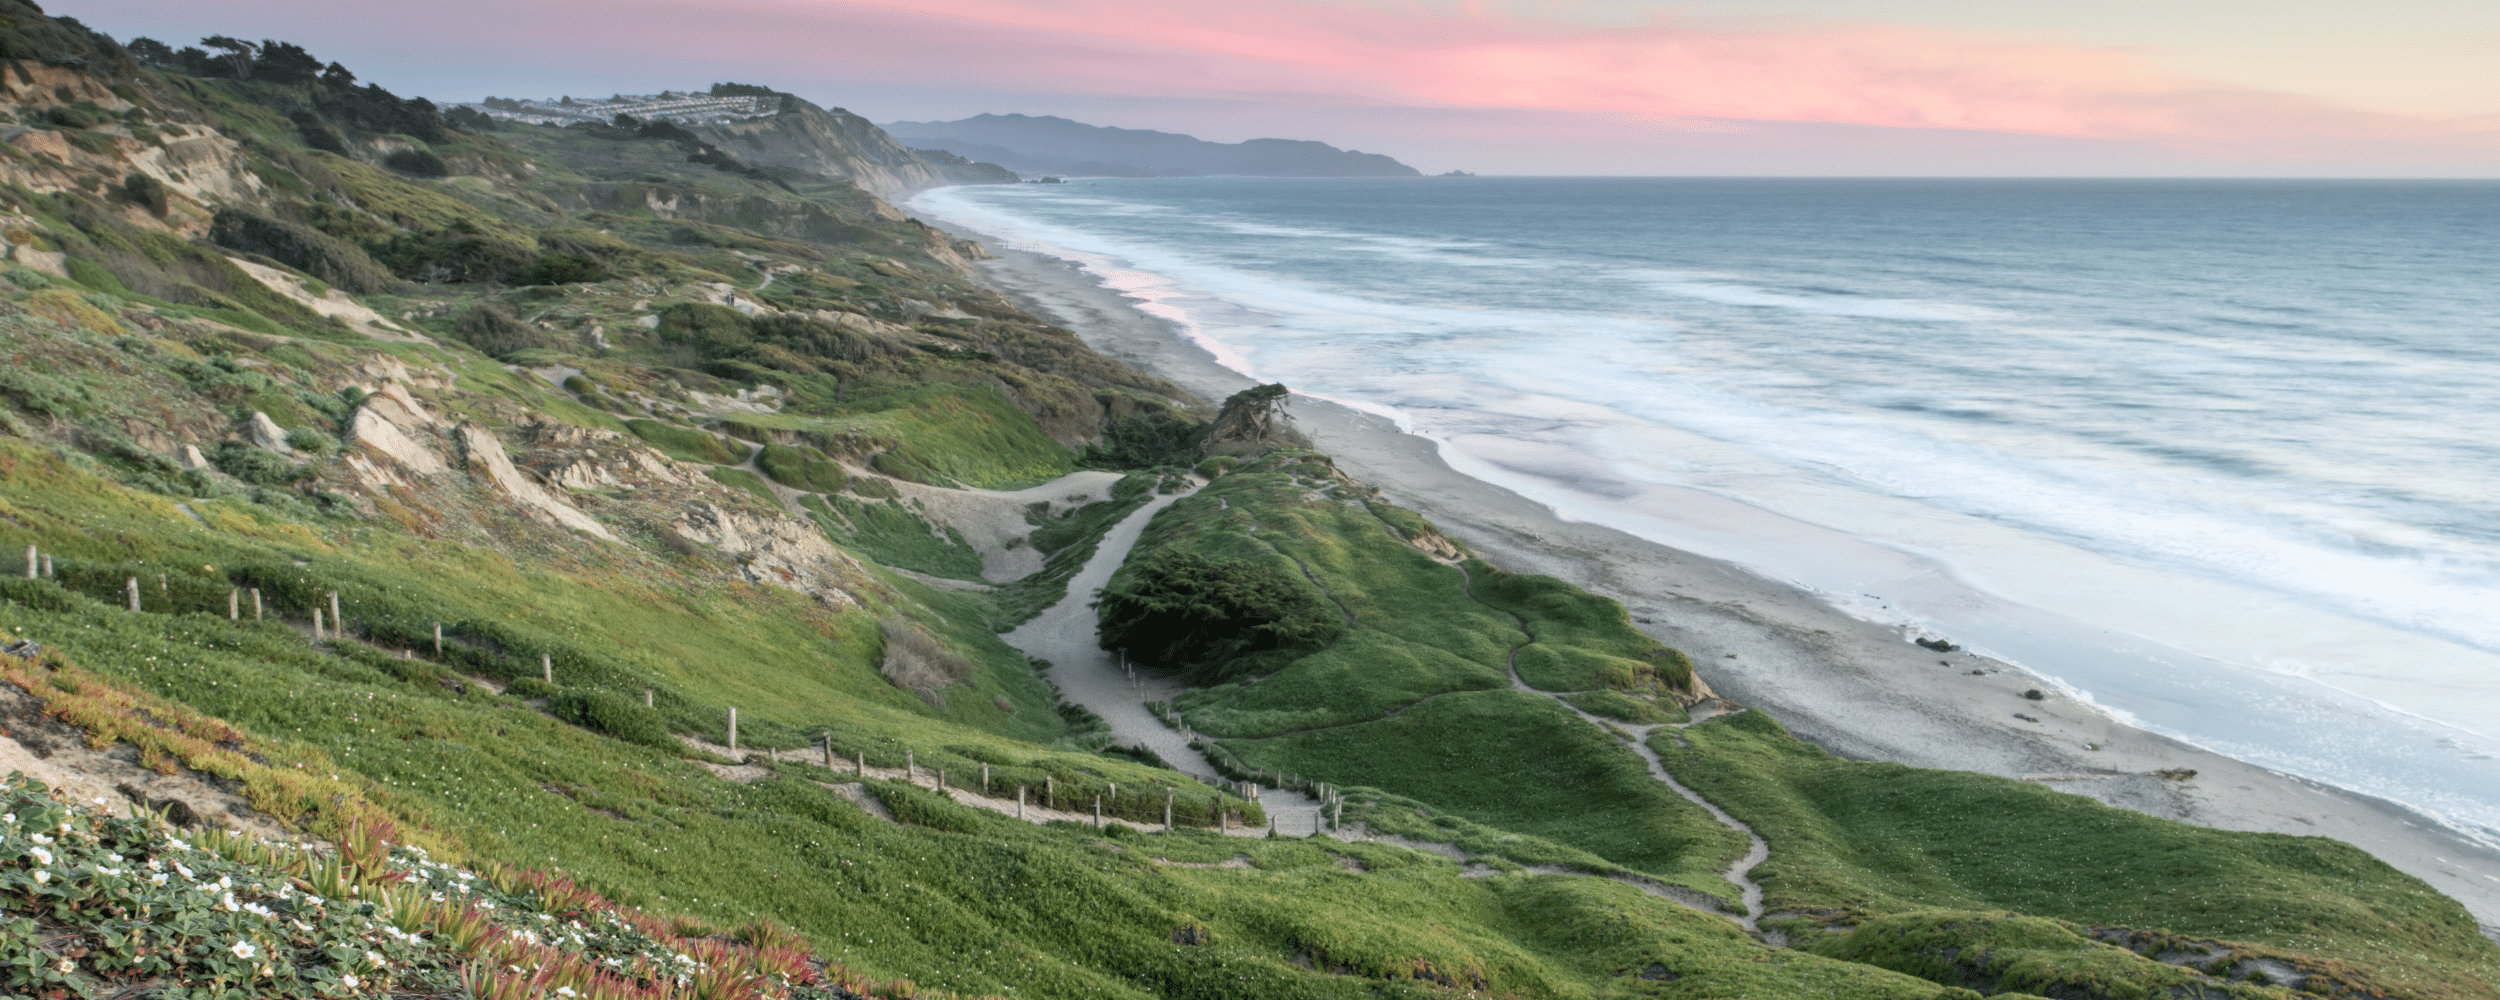 Beautiful coastal line withbeach waves at the fort funston beach